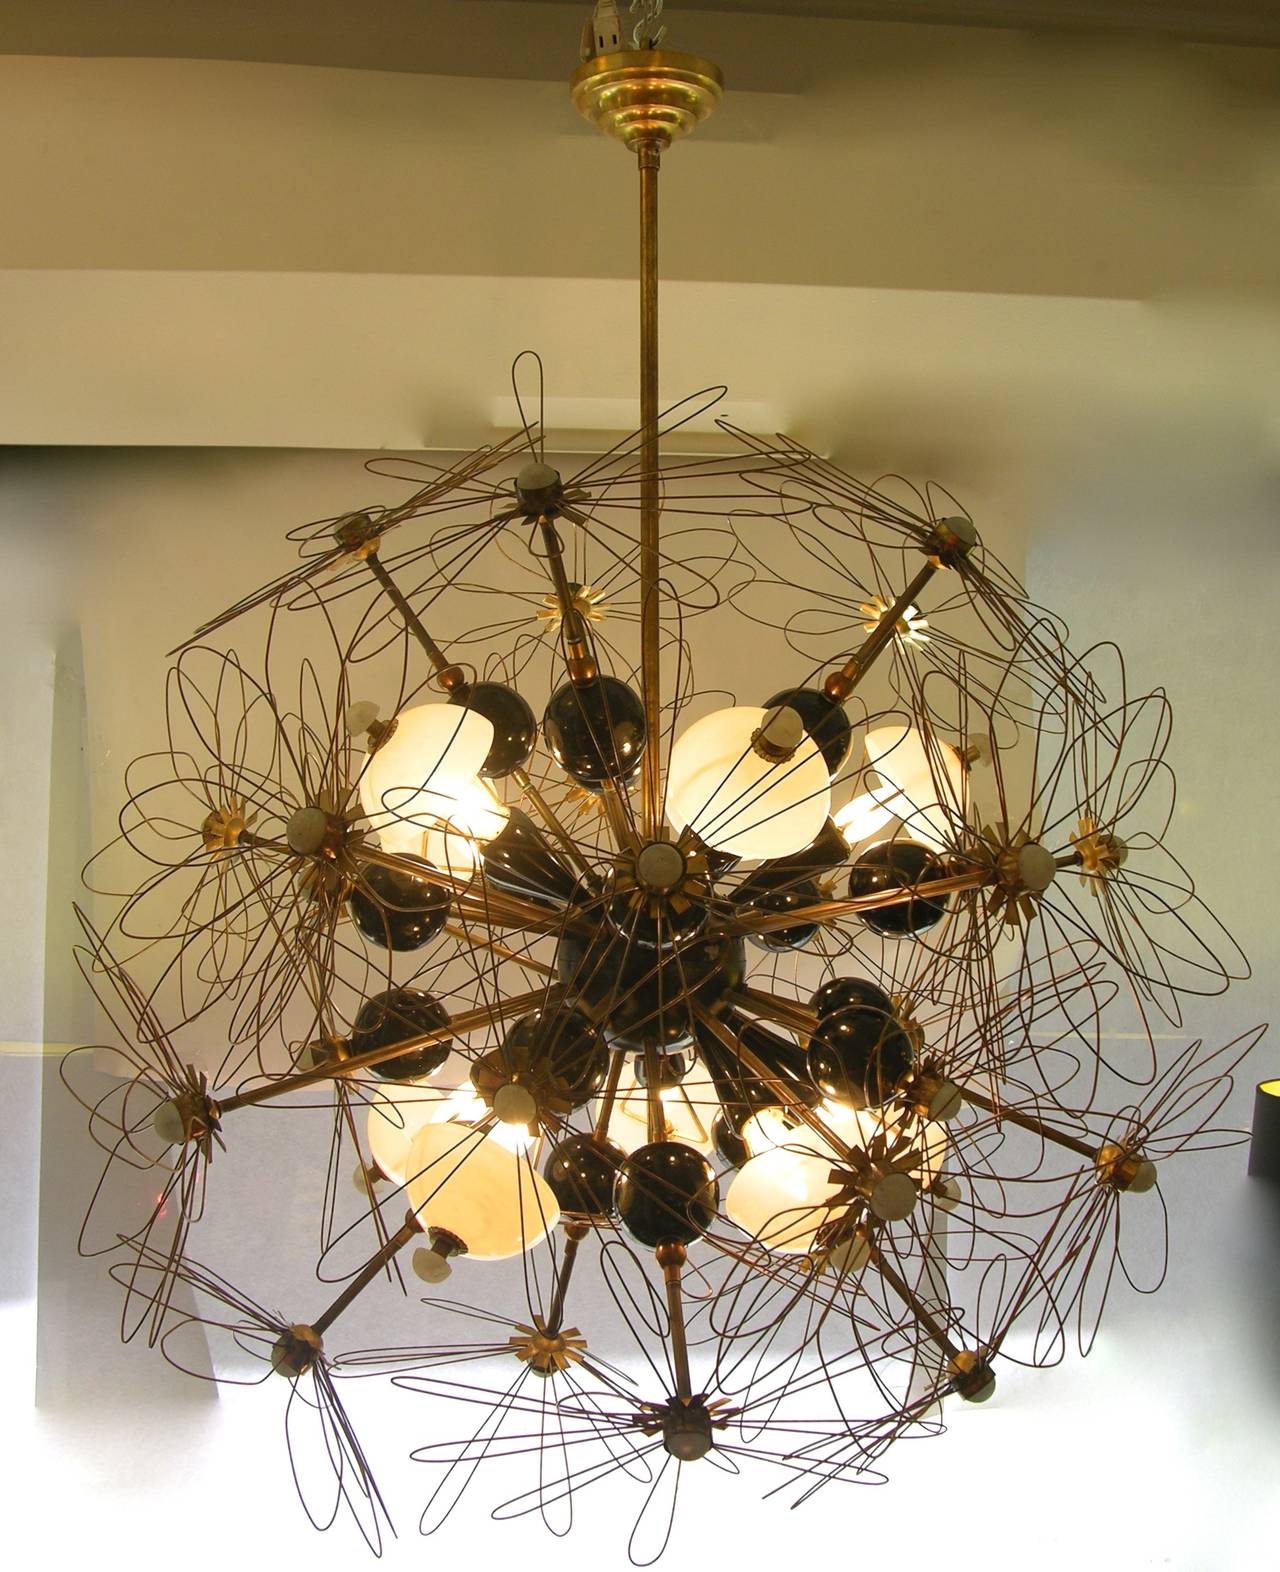 1960s unique Italian organic and very fun chandelier, entirely handcrafted, bronze rods decorated with brass flower silhouettes and black painted metal spheres jutting out of a central black metal core supporting ten conical black sockets with bulbs